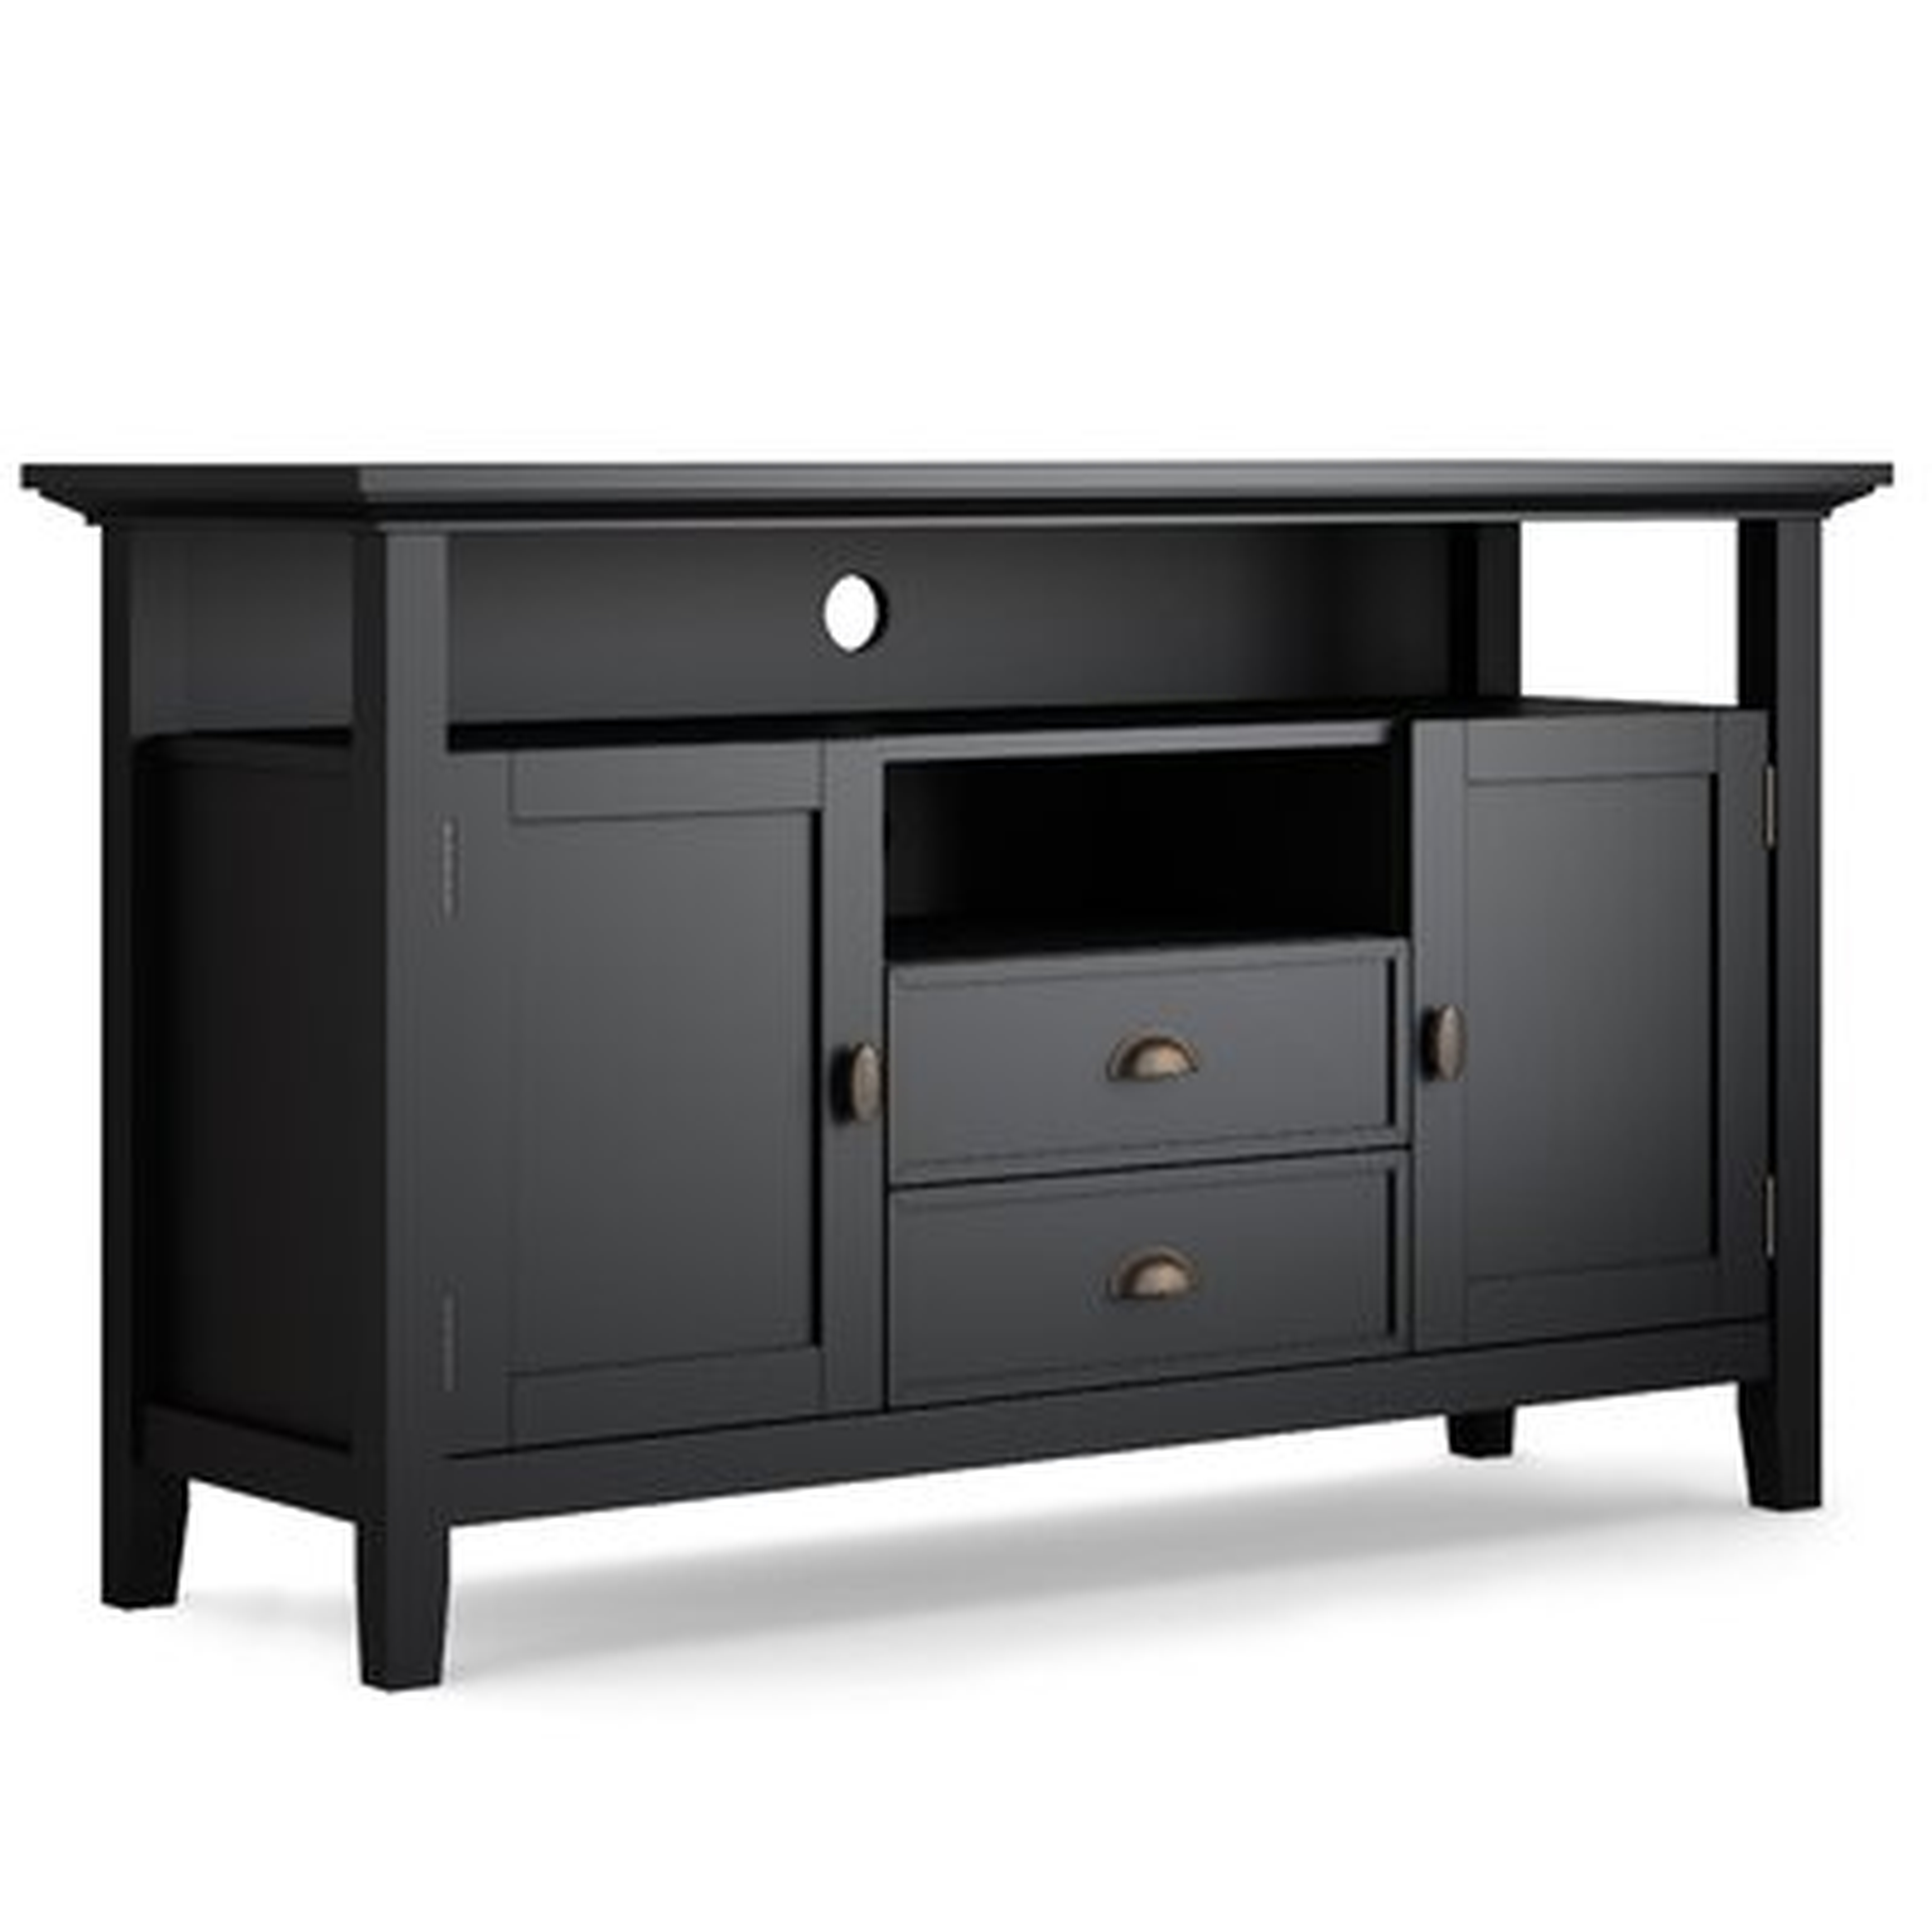 Amatury Solid Wood TV Stand for TVs up to 60" - Wayfair